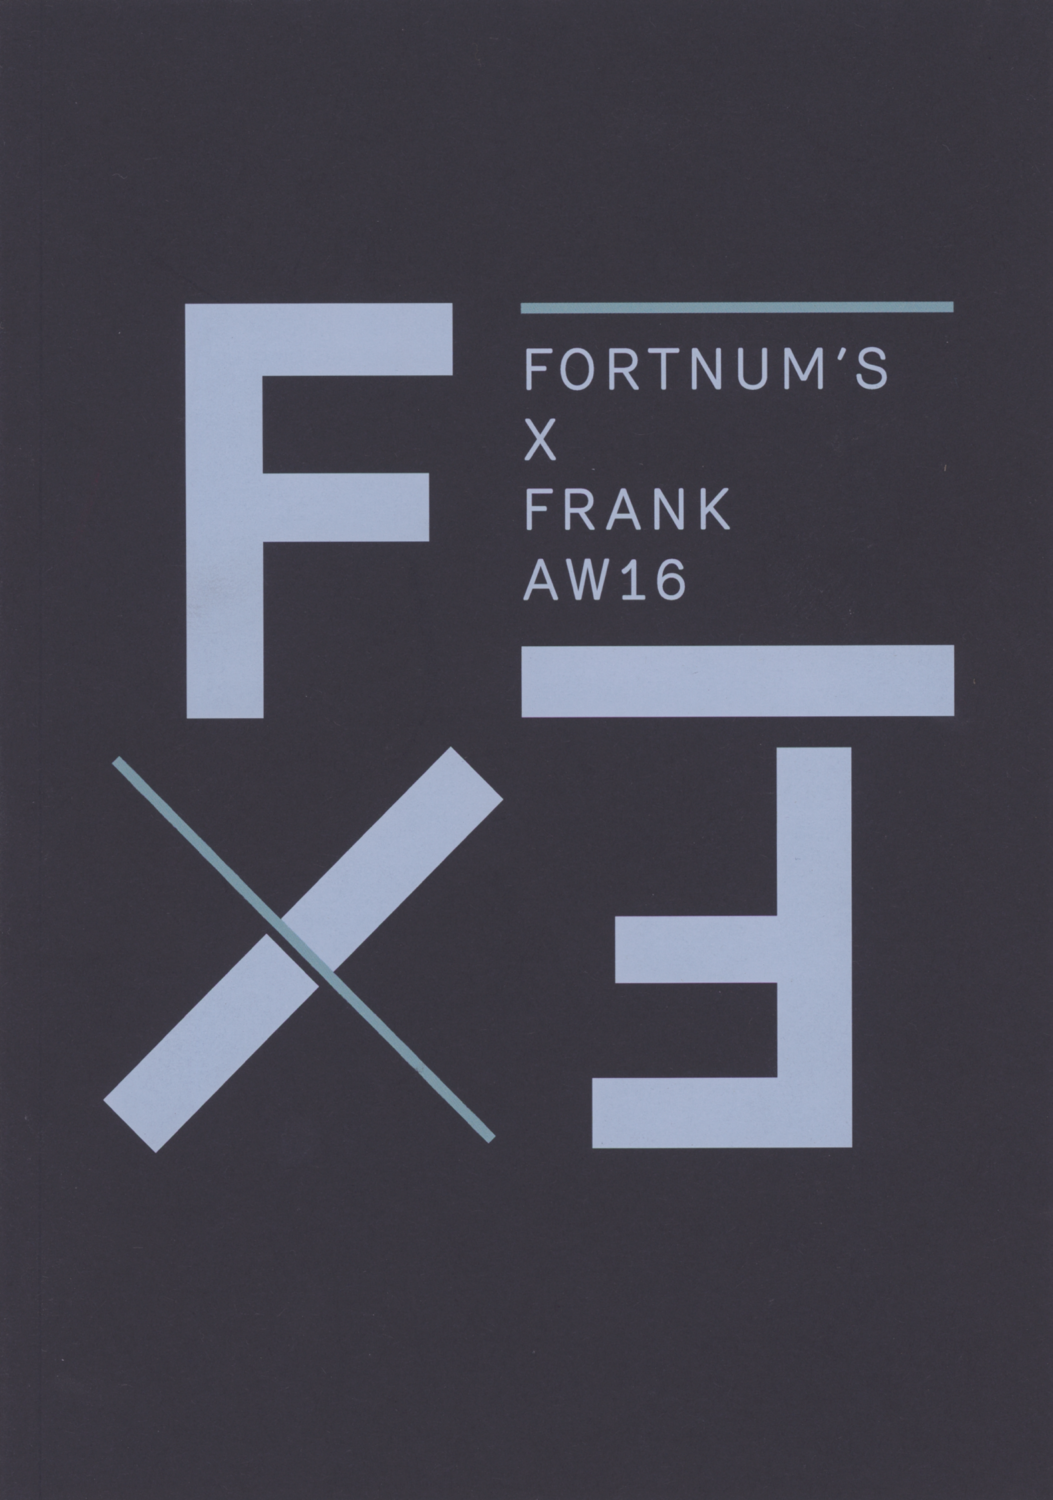 Fortnum’s X Frank Aw16